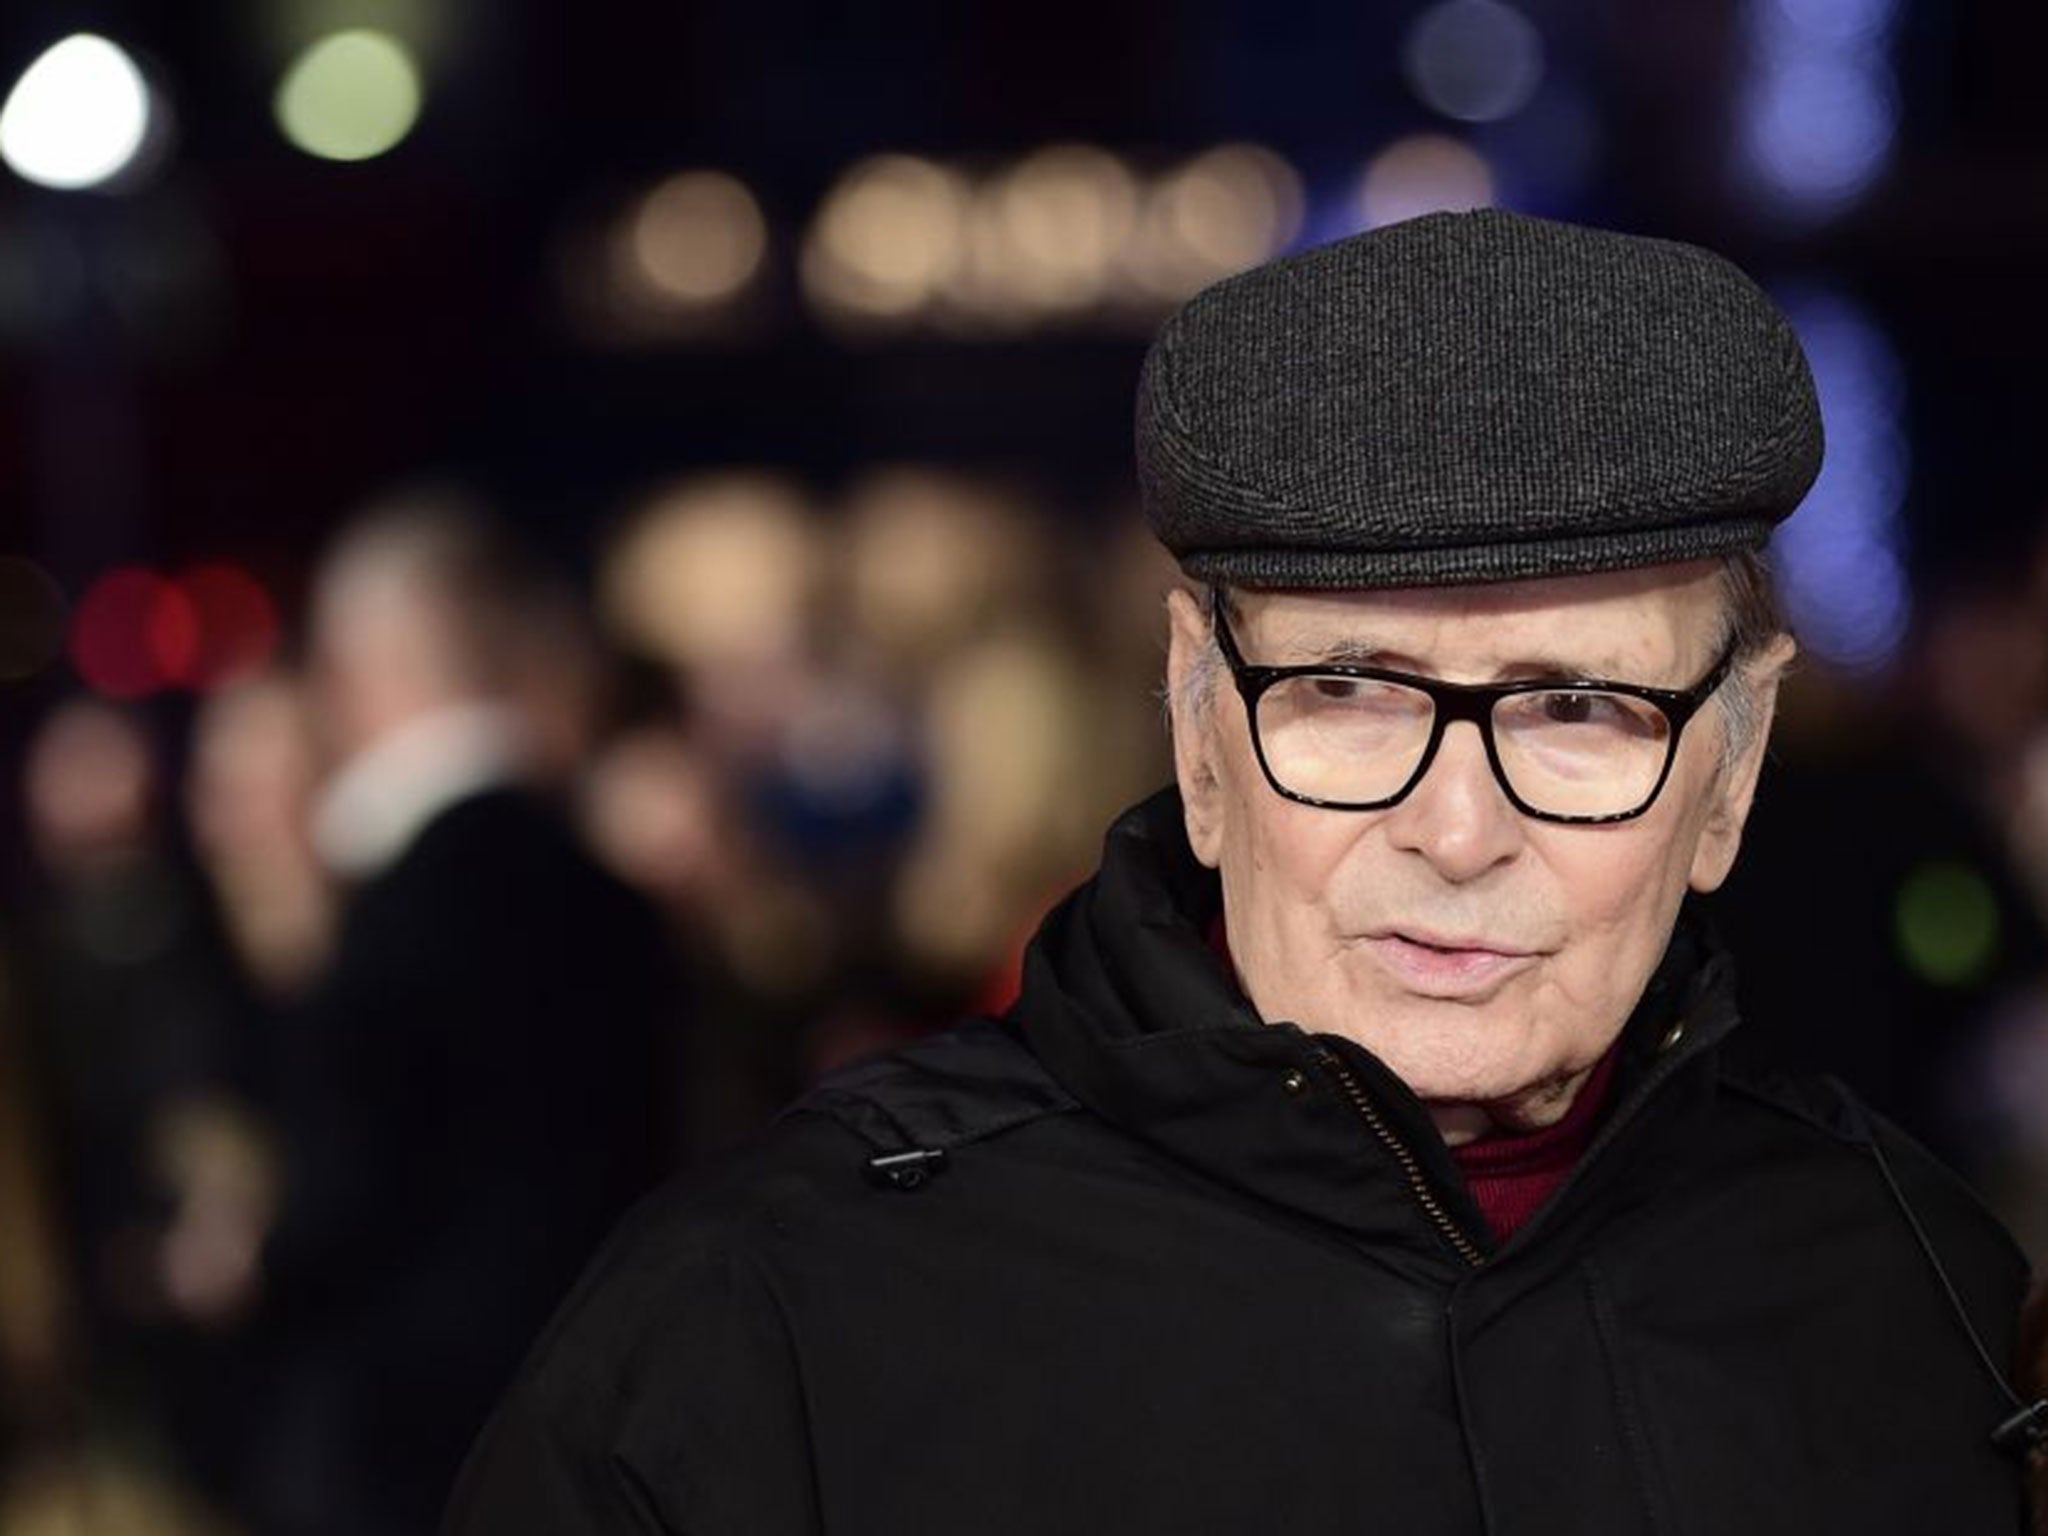 Ennio Morricone denies making disparaging comments about his collaborator Quentin Tarantino